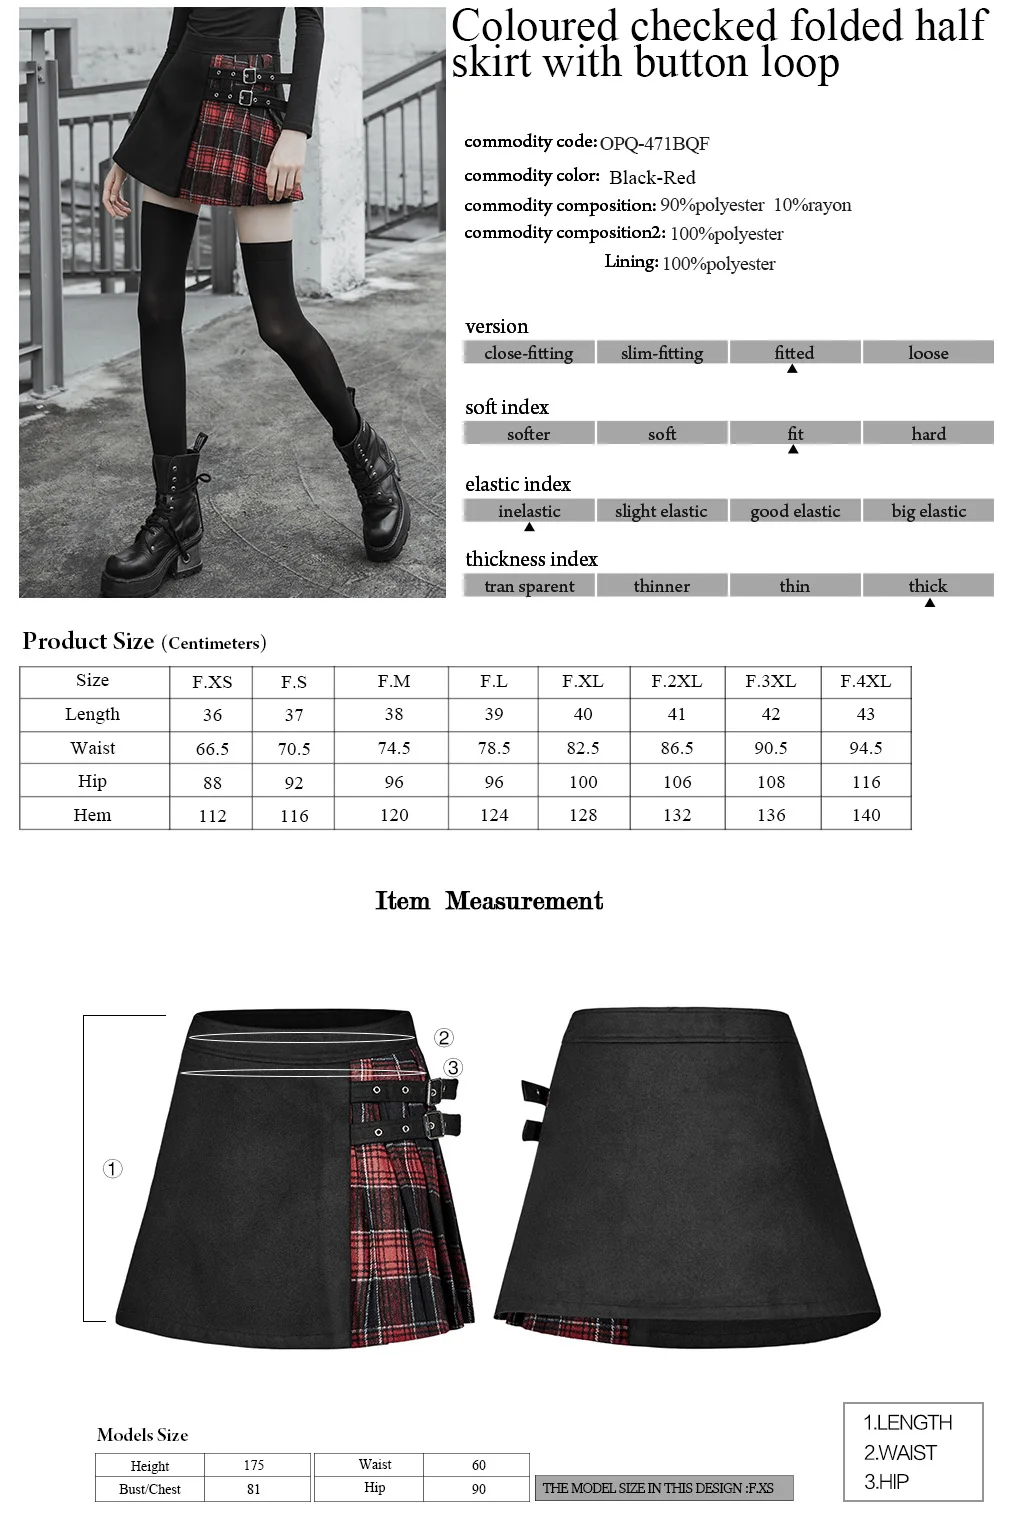 

PUNK RAVE Women's Coloured Checked Folded Half Skirt with Button Loop Personality Casual Mini Skirt